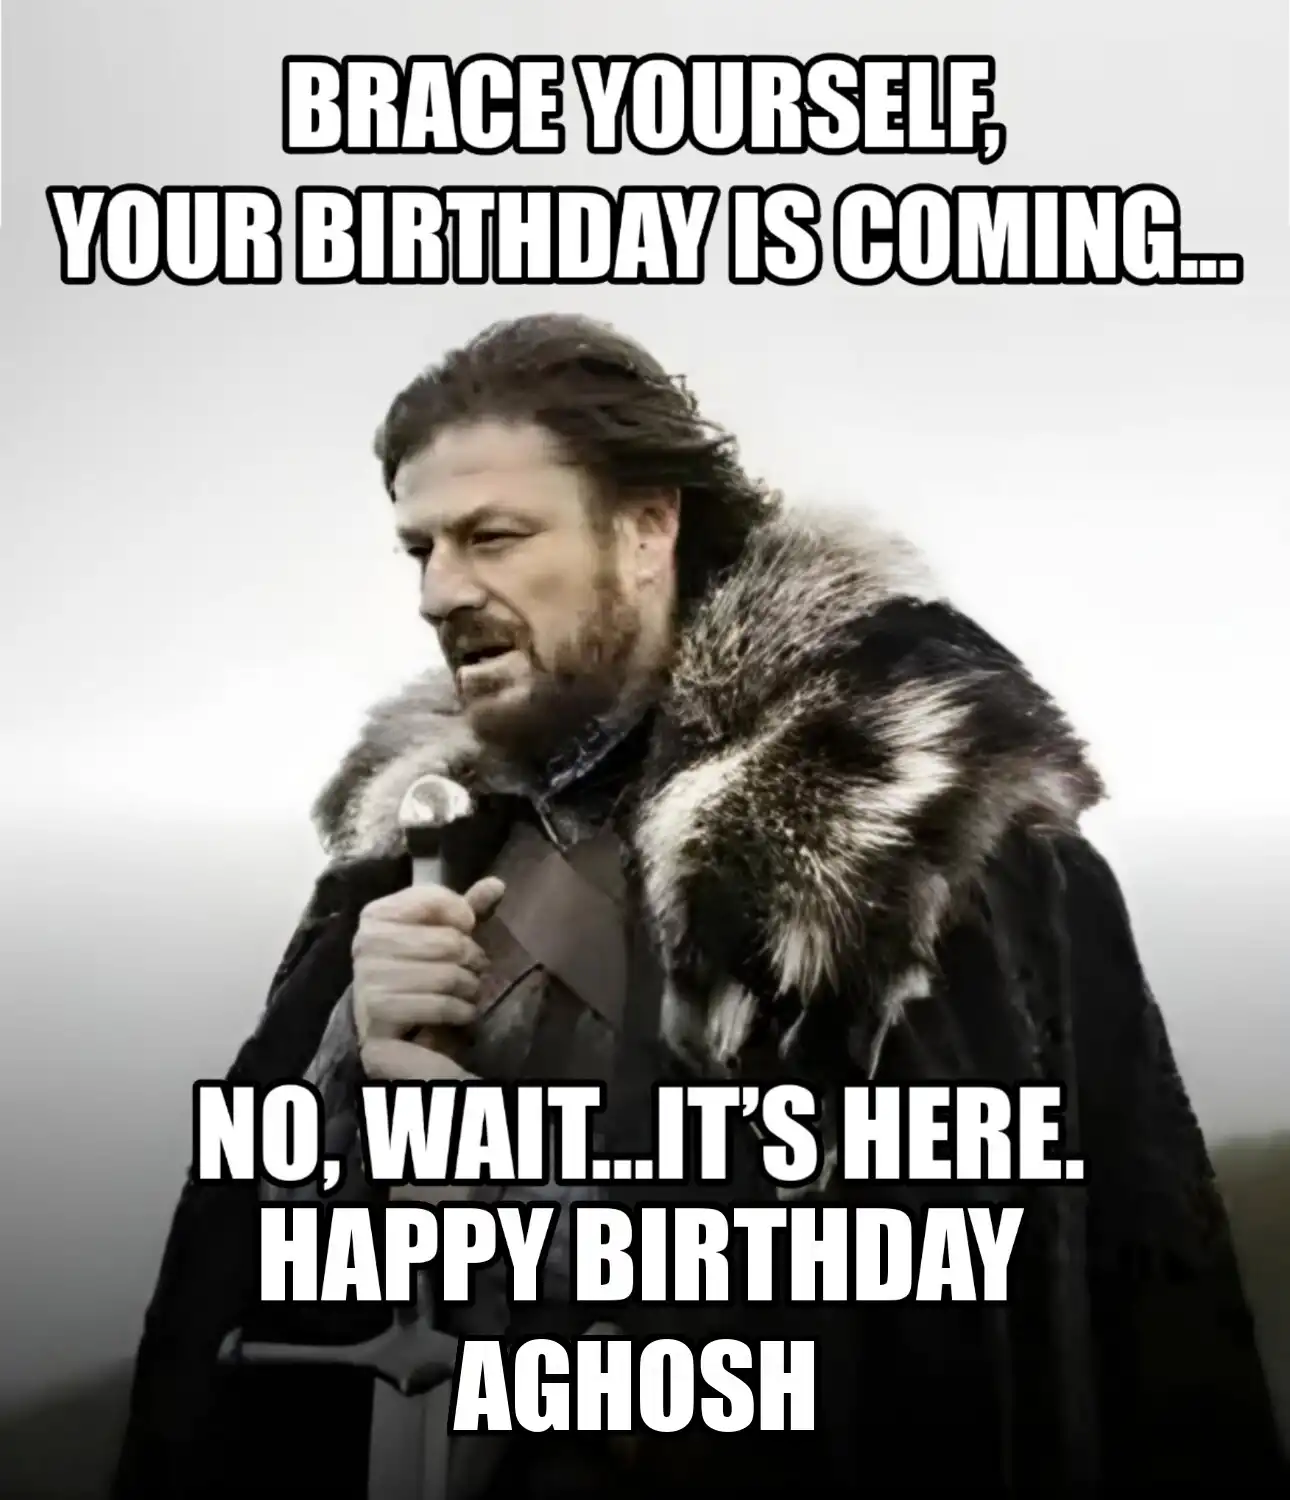 Happy Birthday Aghosh Brace Yourself Your Birthday Is Coming Meme